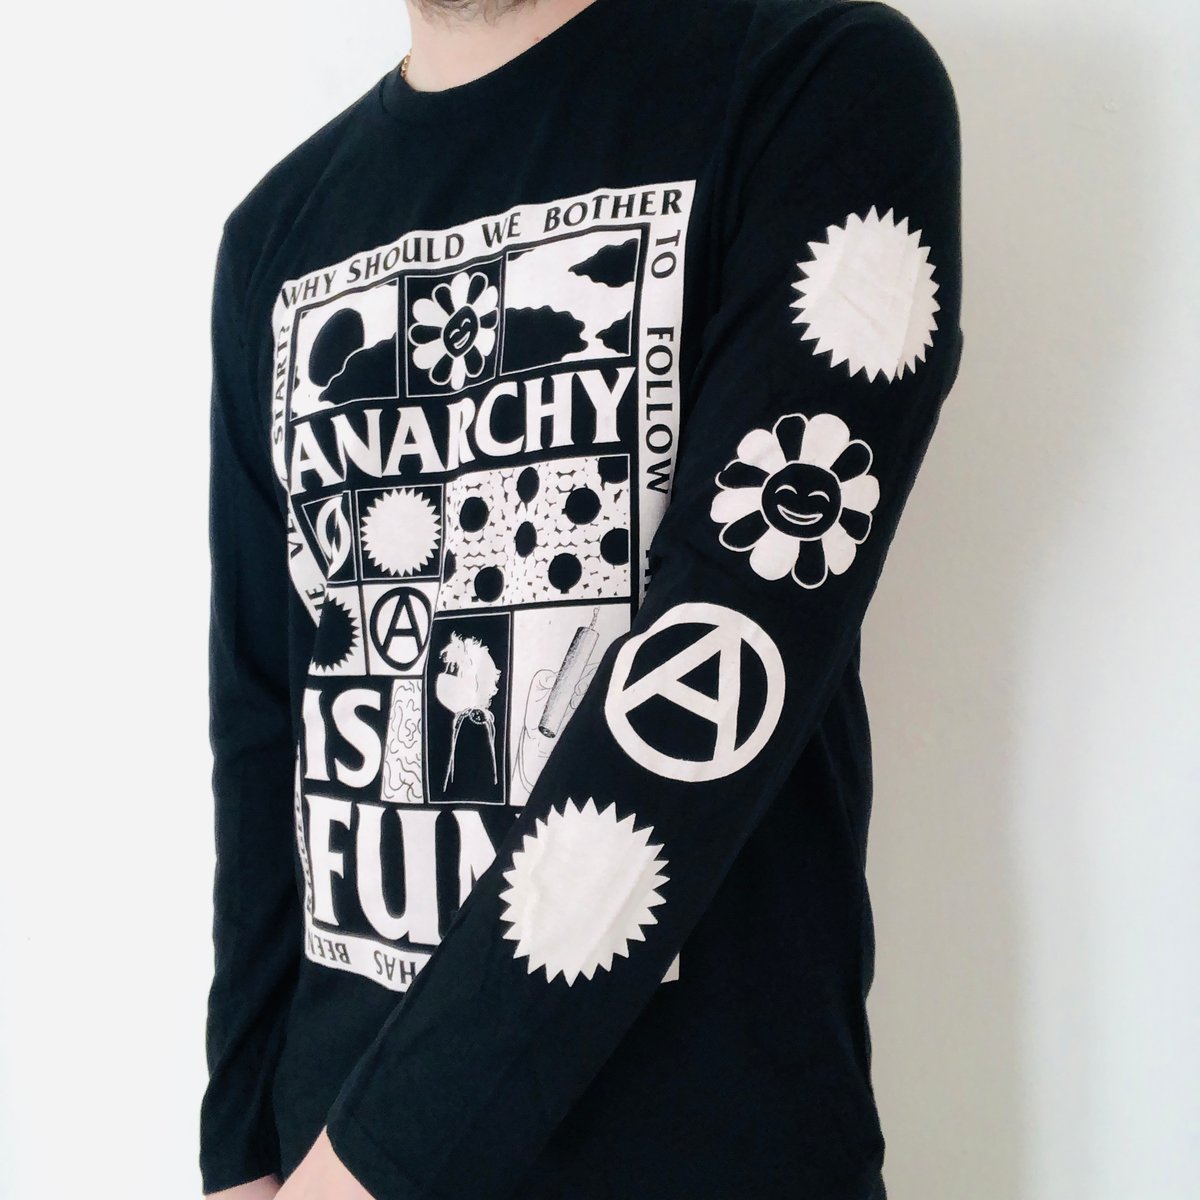 Image of Anarchy is Fun! long sleeve black shirt